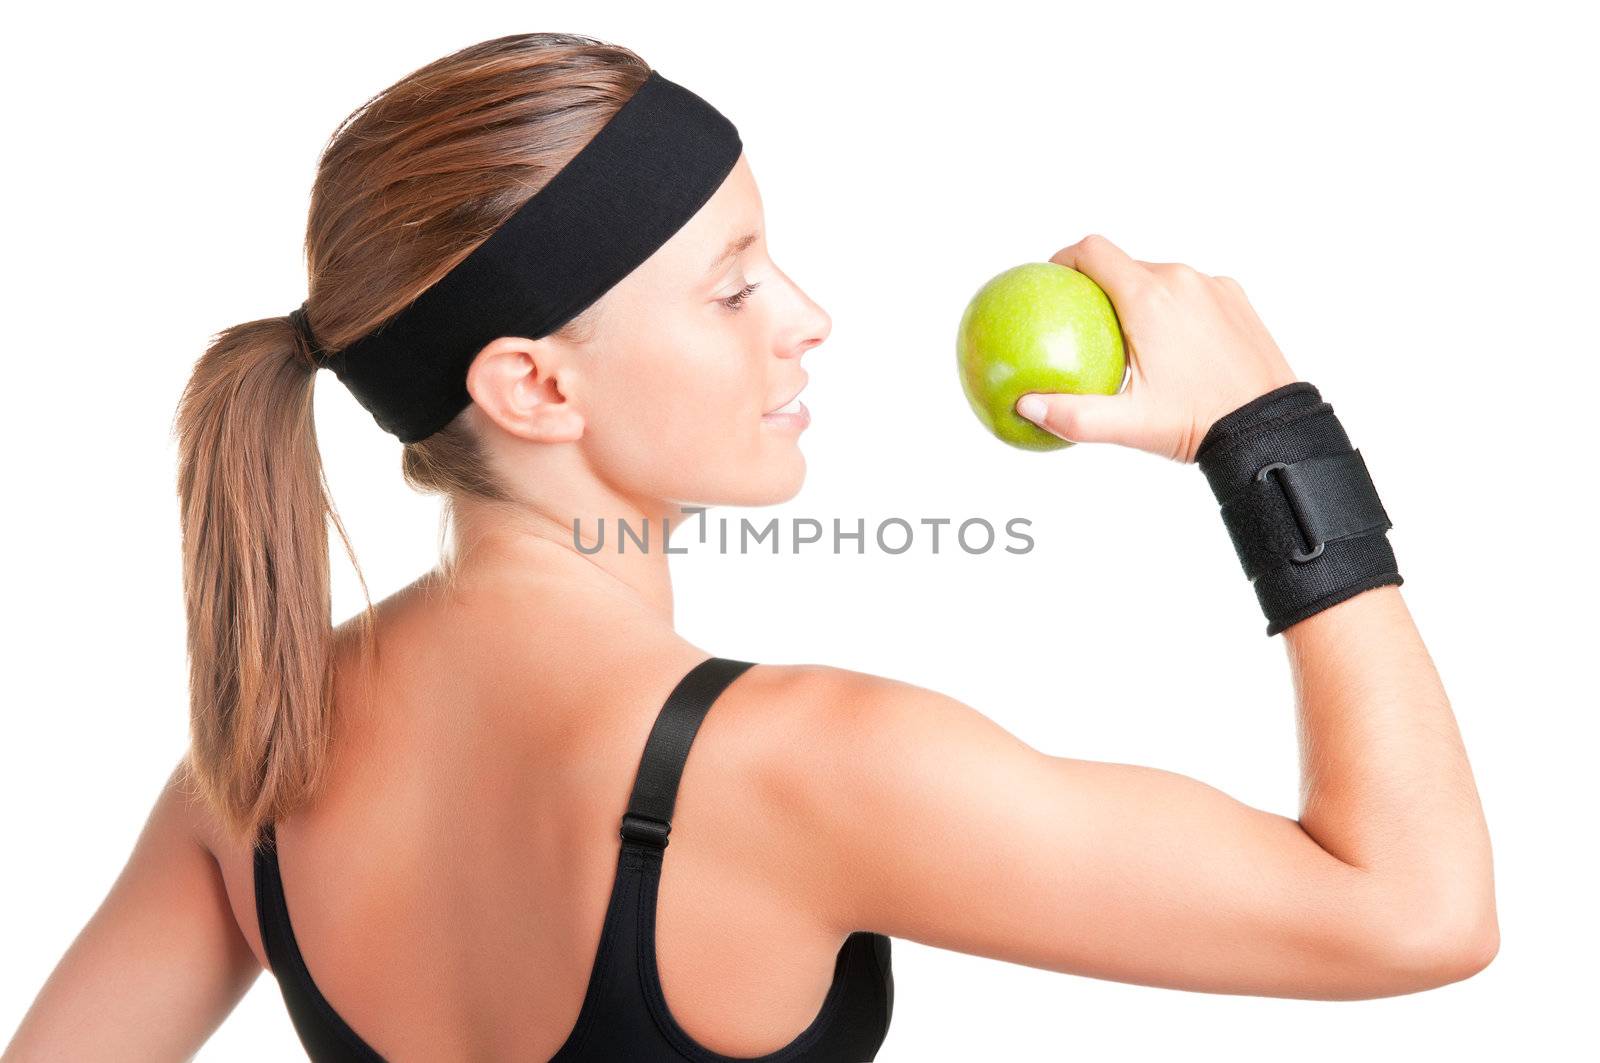 Woman about to eat a green apple after her workout at the gym